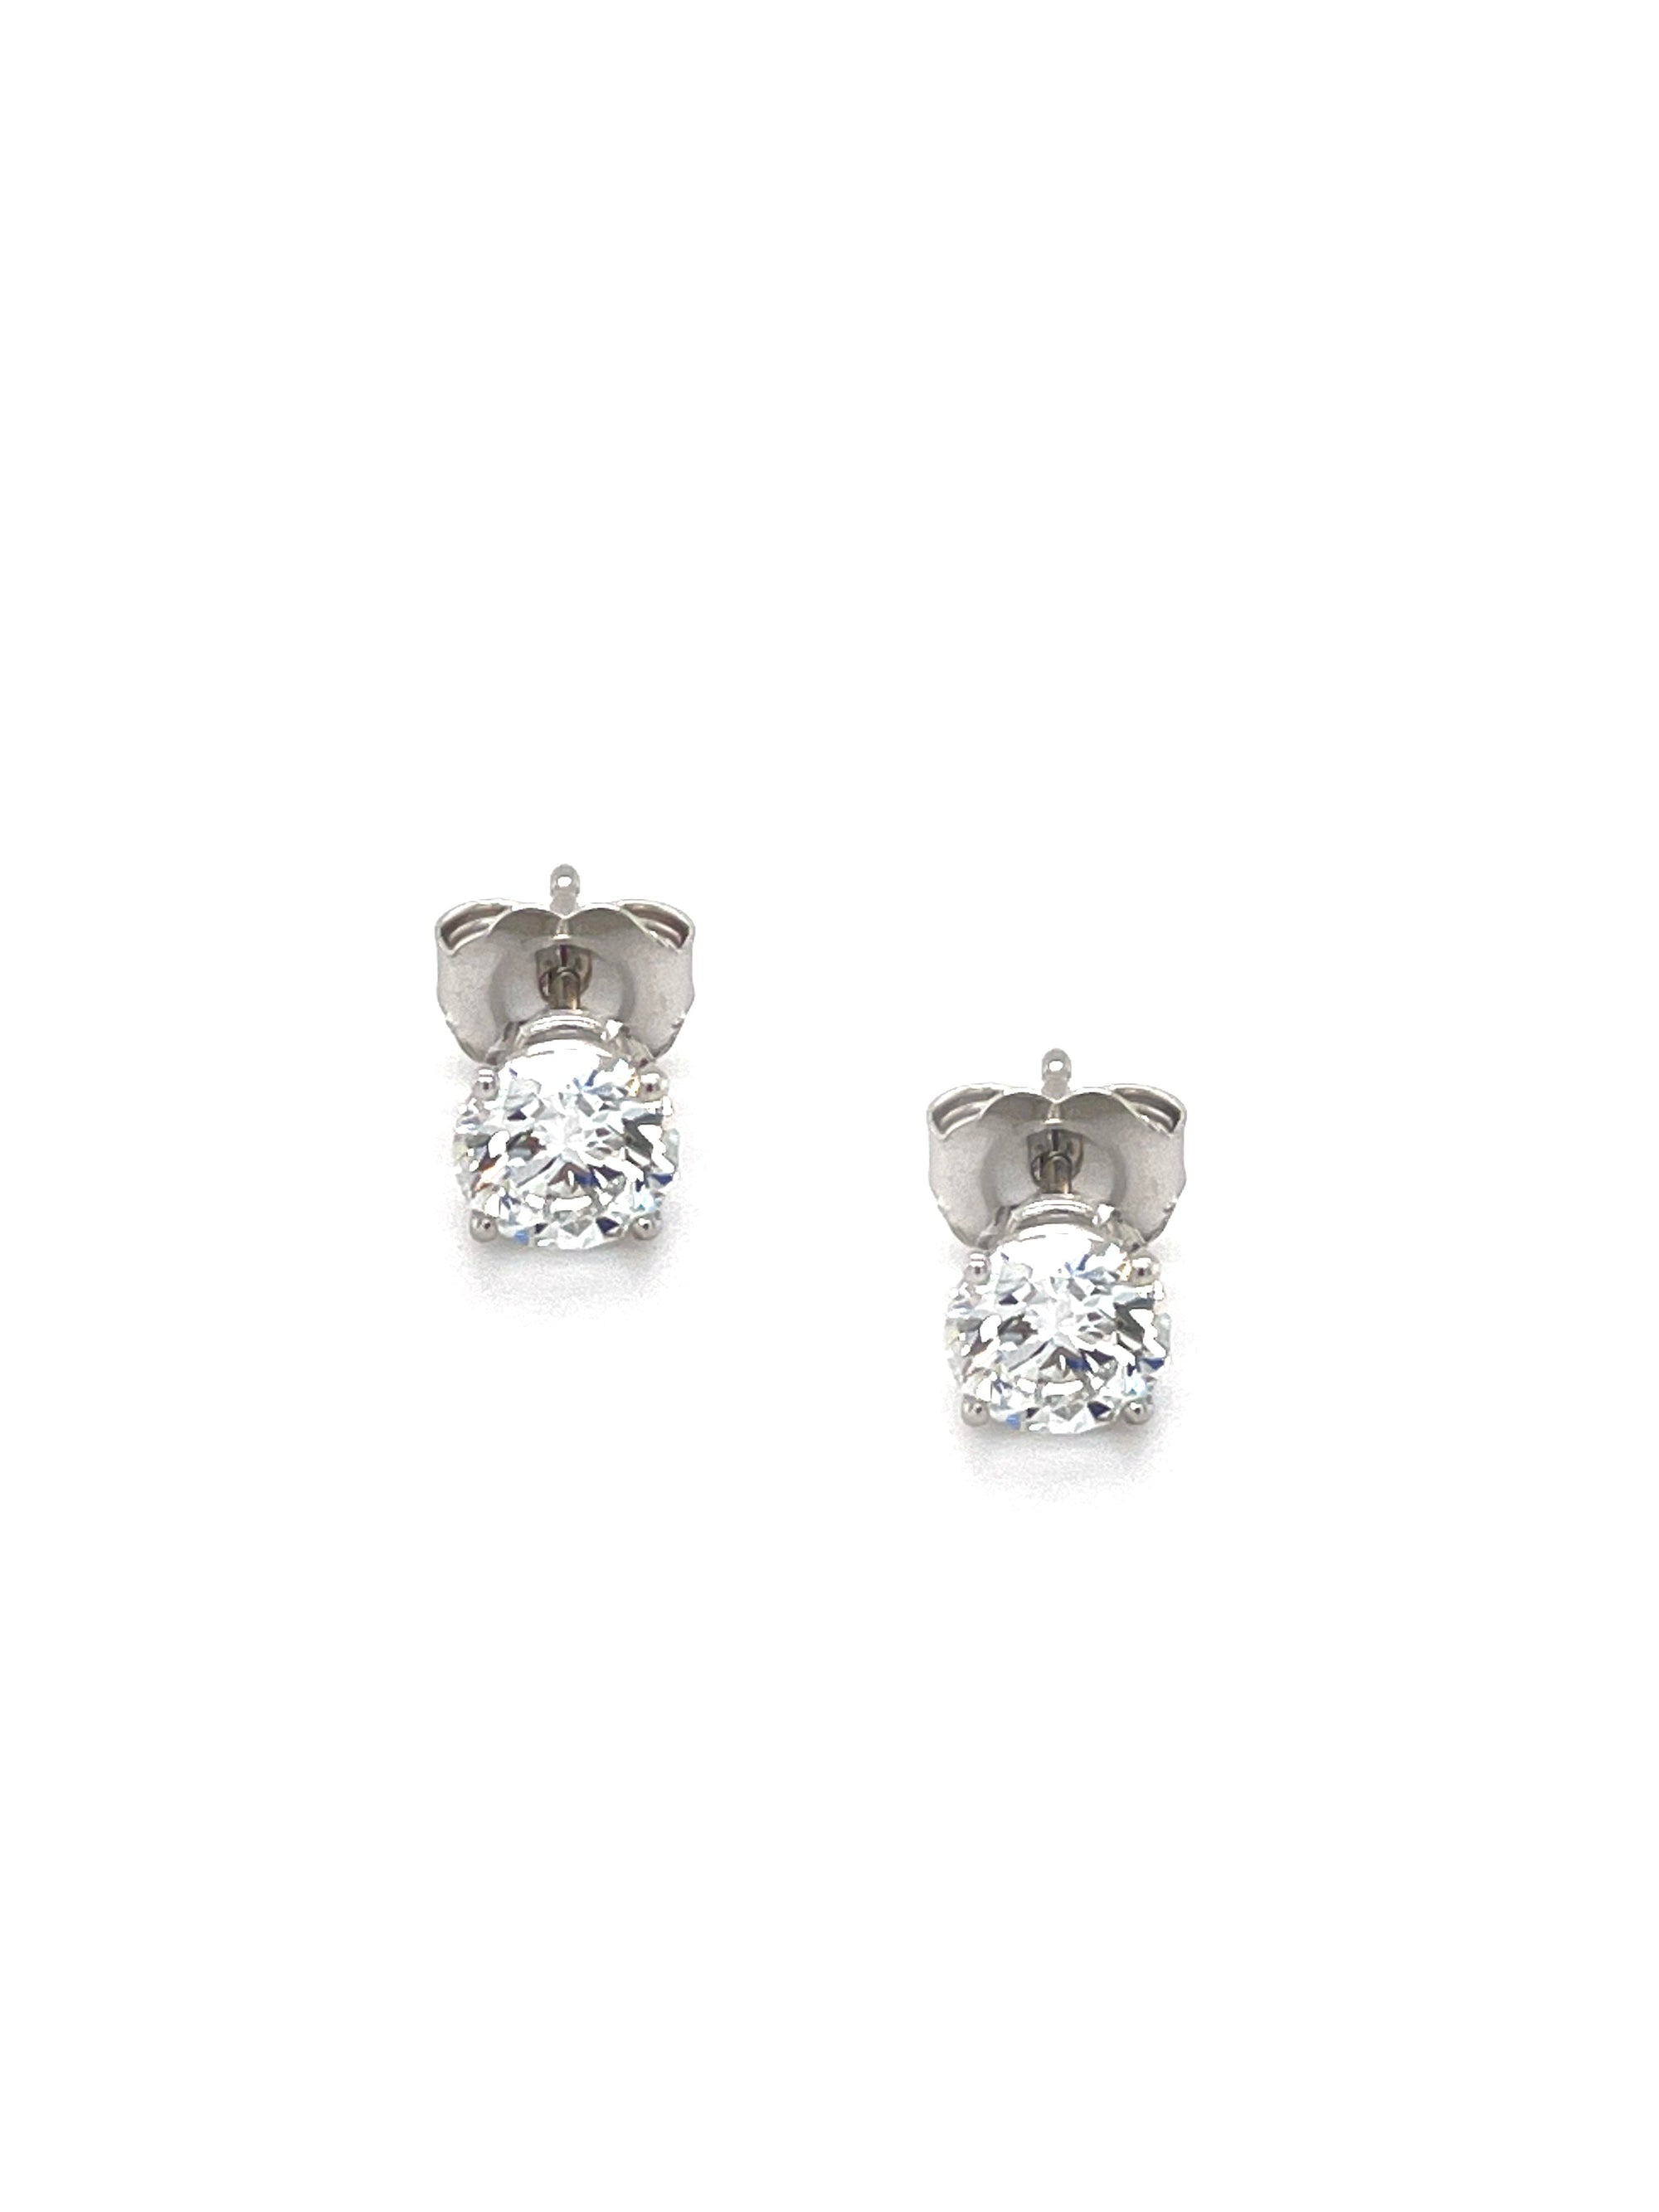 14K White Gold 1.05CT Lab Grown Diamond Solitaire Stud Earrings